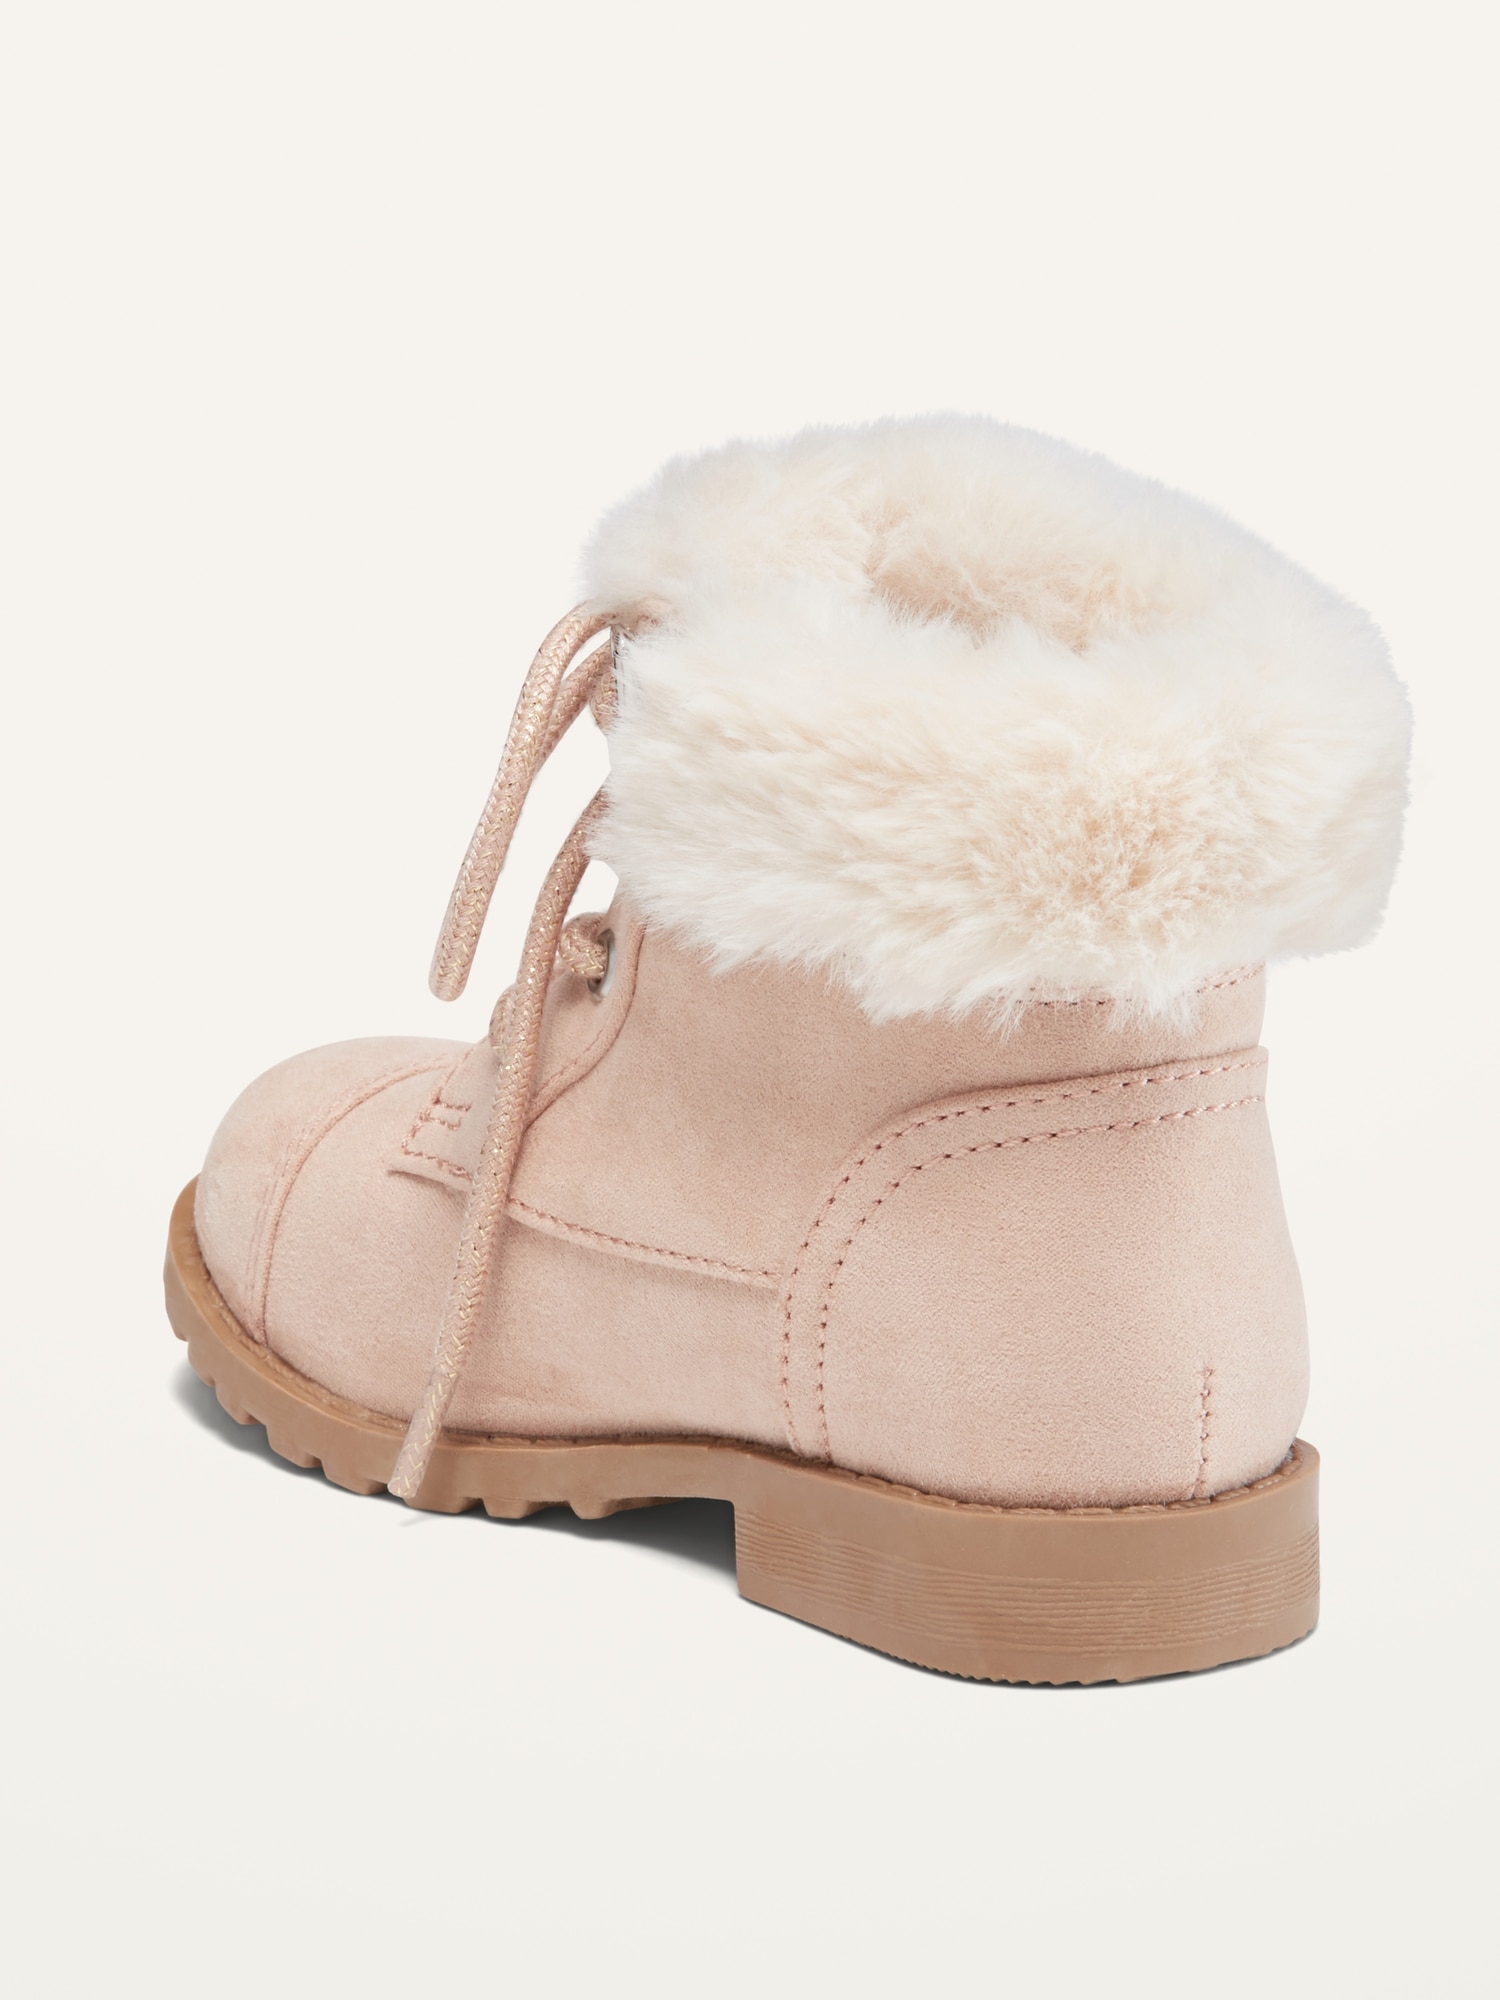 fur boots for toddlers